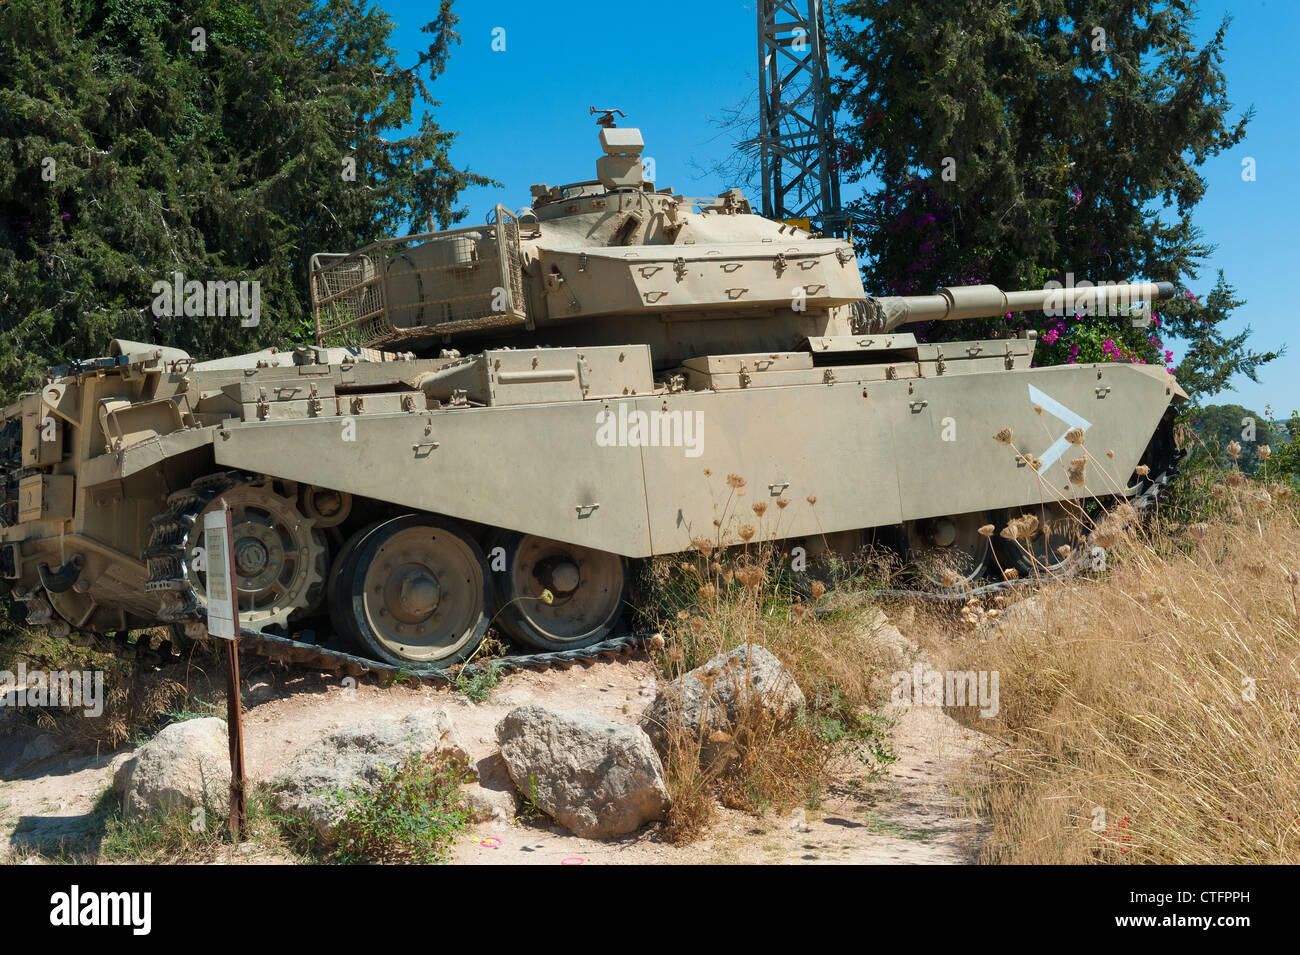 A solitary Israeli Merkava tank at the entrance to 'Yad La Shiryon' memorial and museum in Israel. Stock Photo